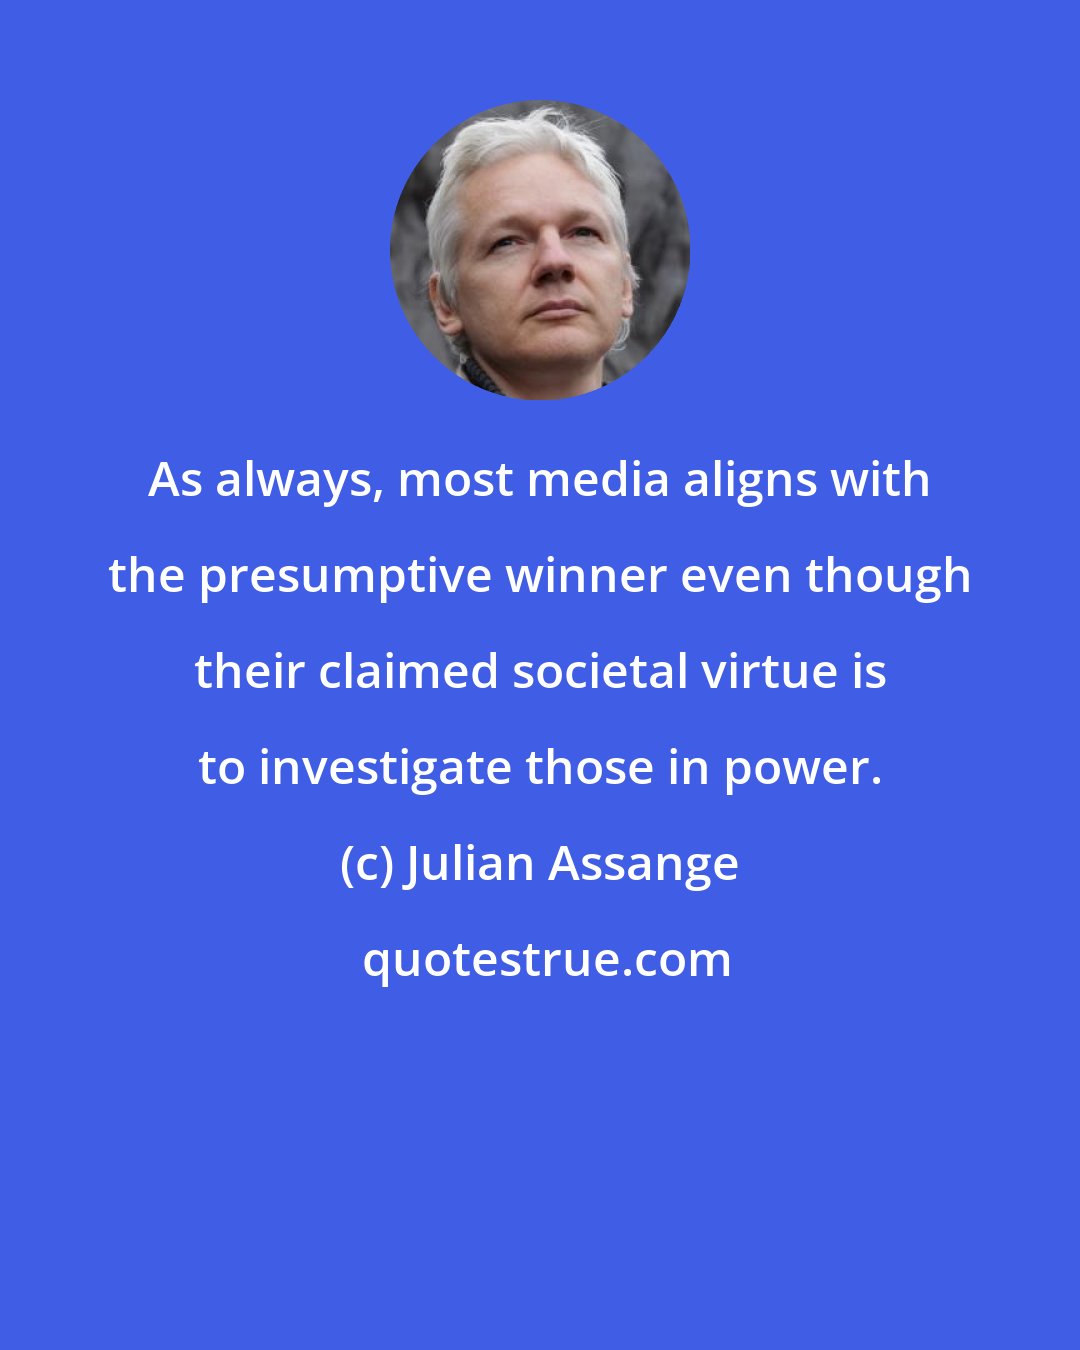 Julian Assange: As always, most media aligns with the presumptive winner even though their claimed societal virtue is to investigate those in power.